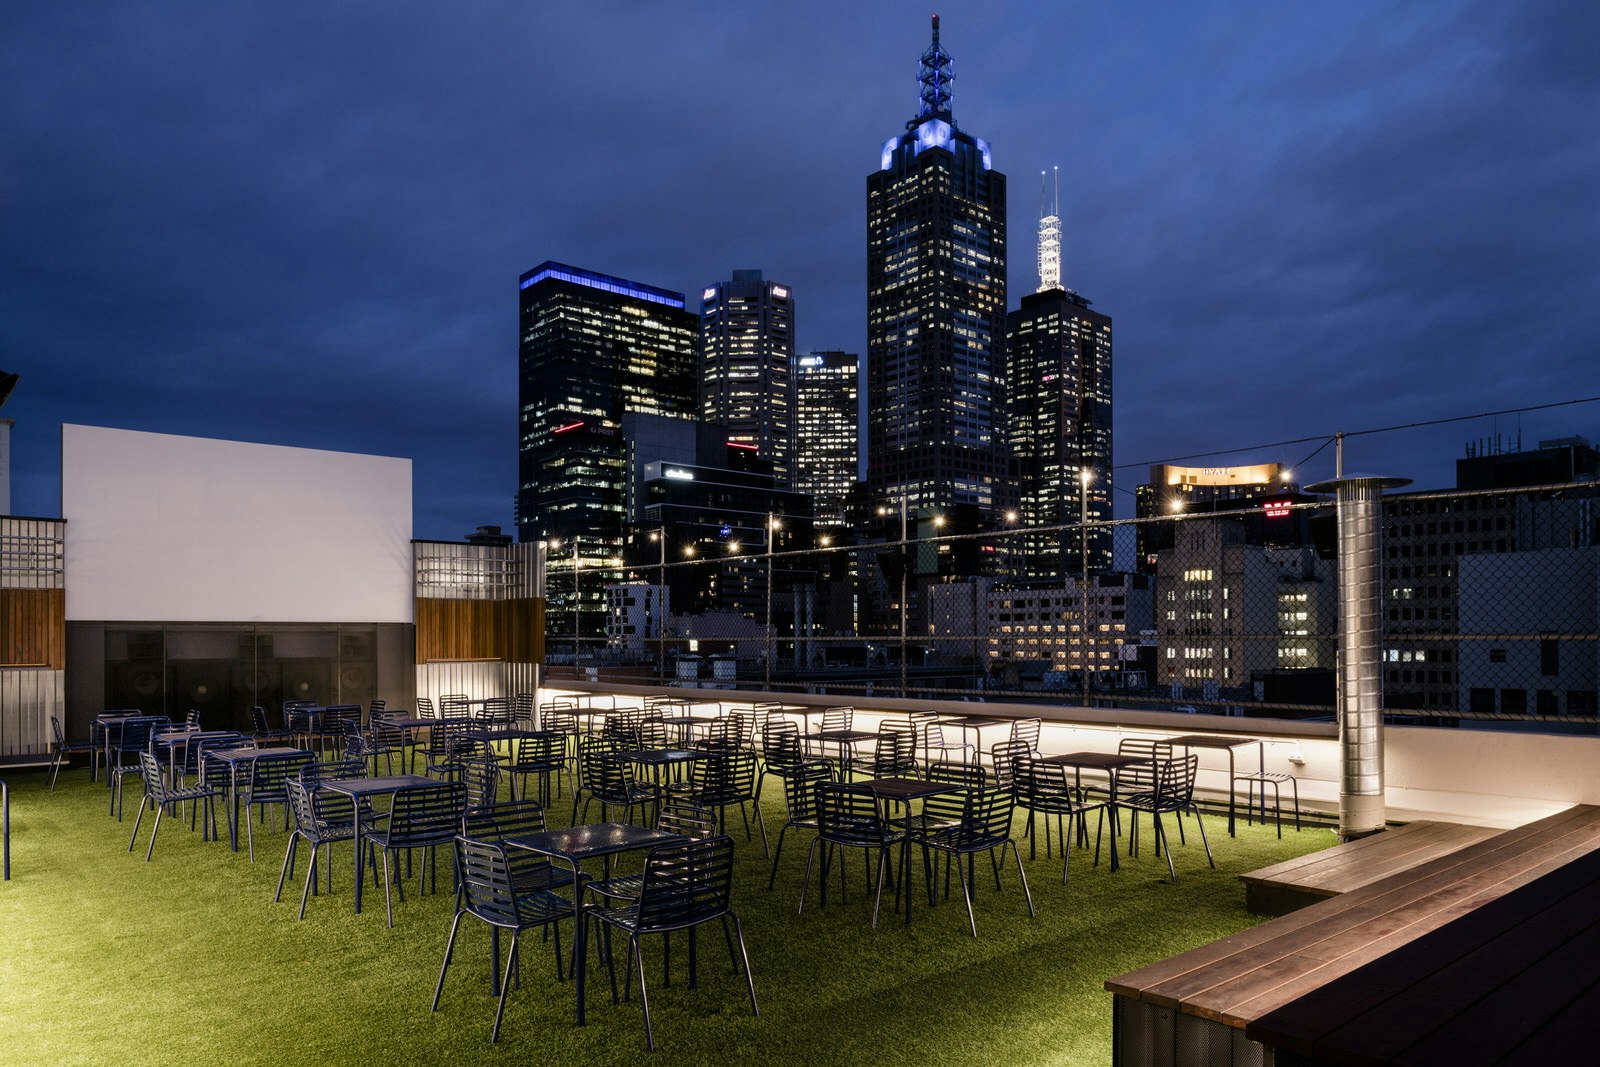 A nighttime shot of rooftop bar. There is astroturf on the floor, and tables and chairs are organised neatly in front of an outdoor cinema screen. Skyscrapers can be seen beyond the glass wall of the bar.